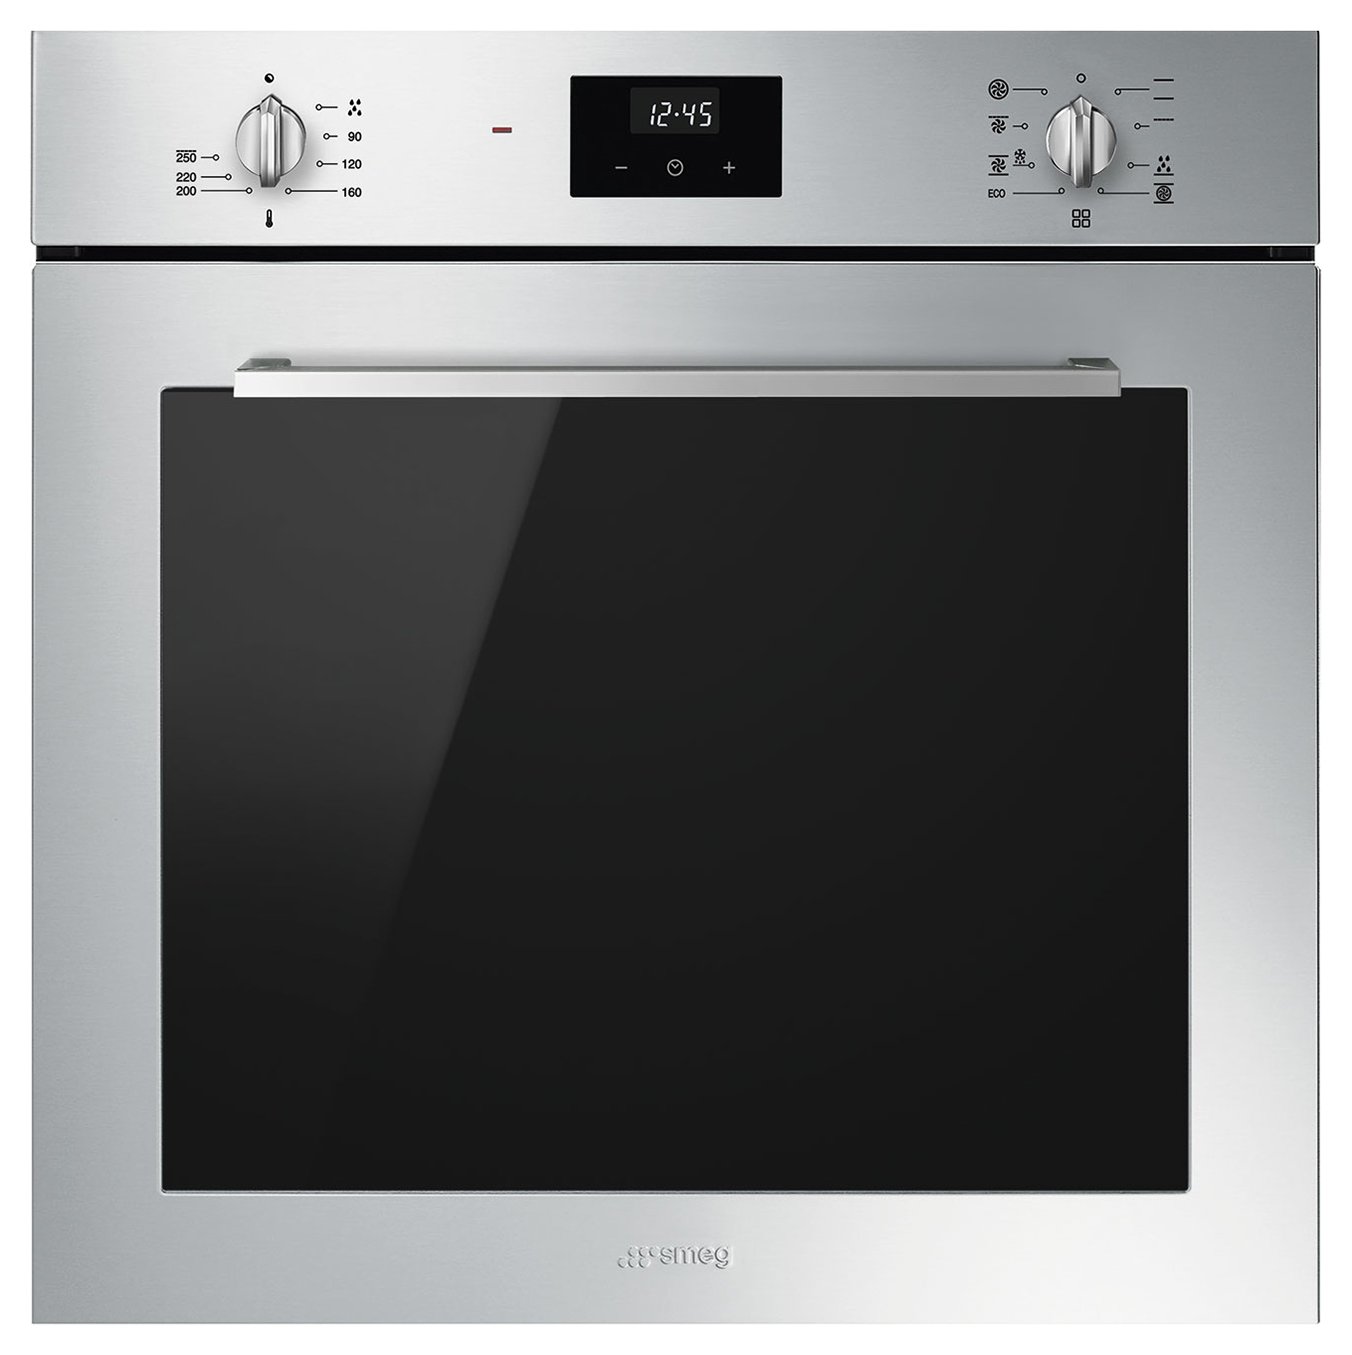 Smeg Cucina SF6400TVX Built In Single Electric Oven -S/Steel